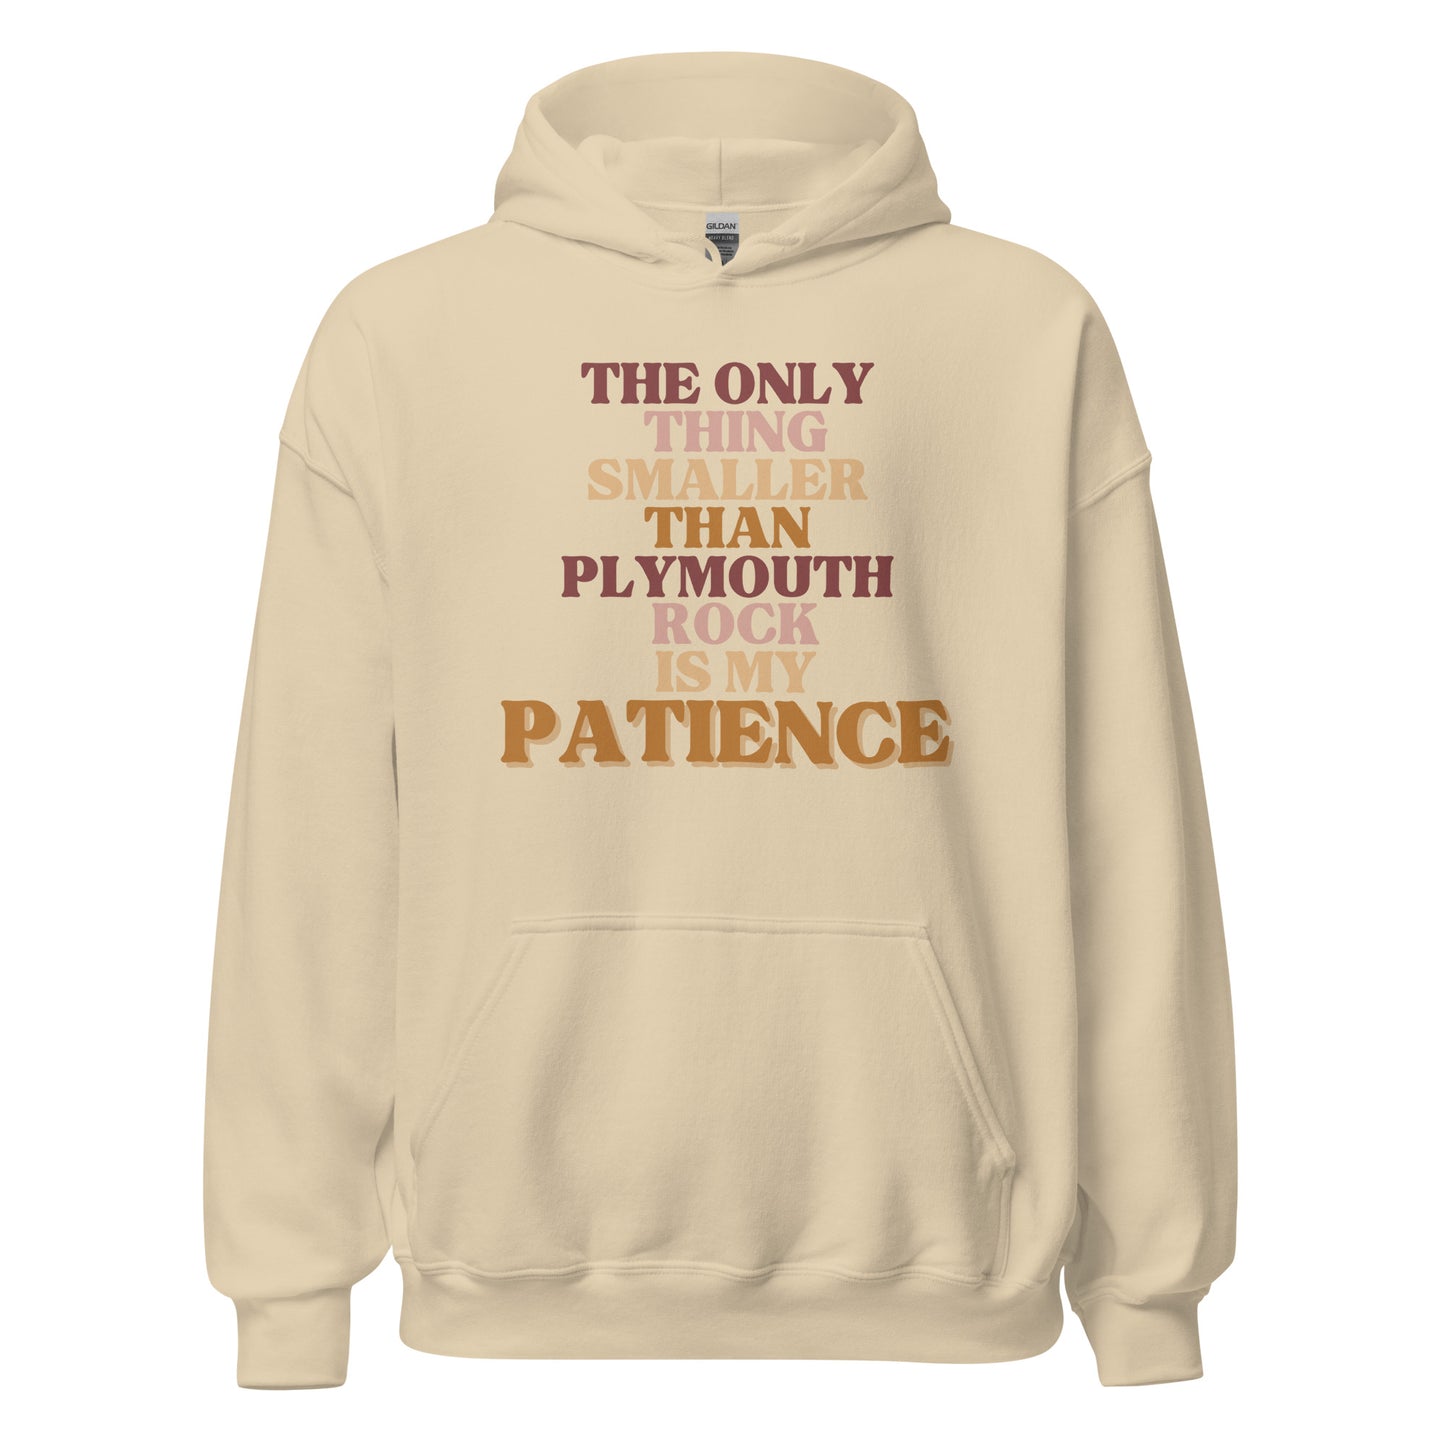 Plymouth Rock Patience Hoodie